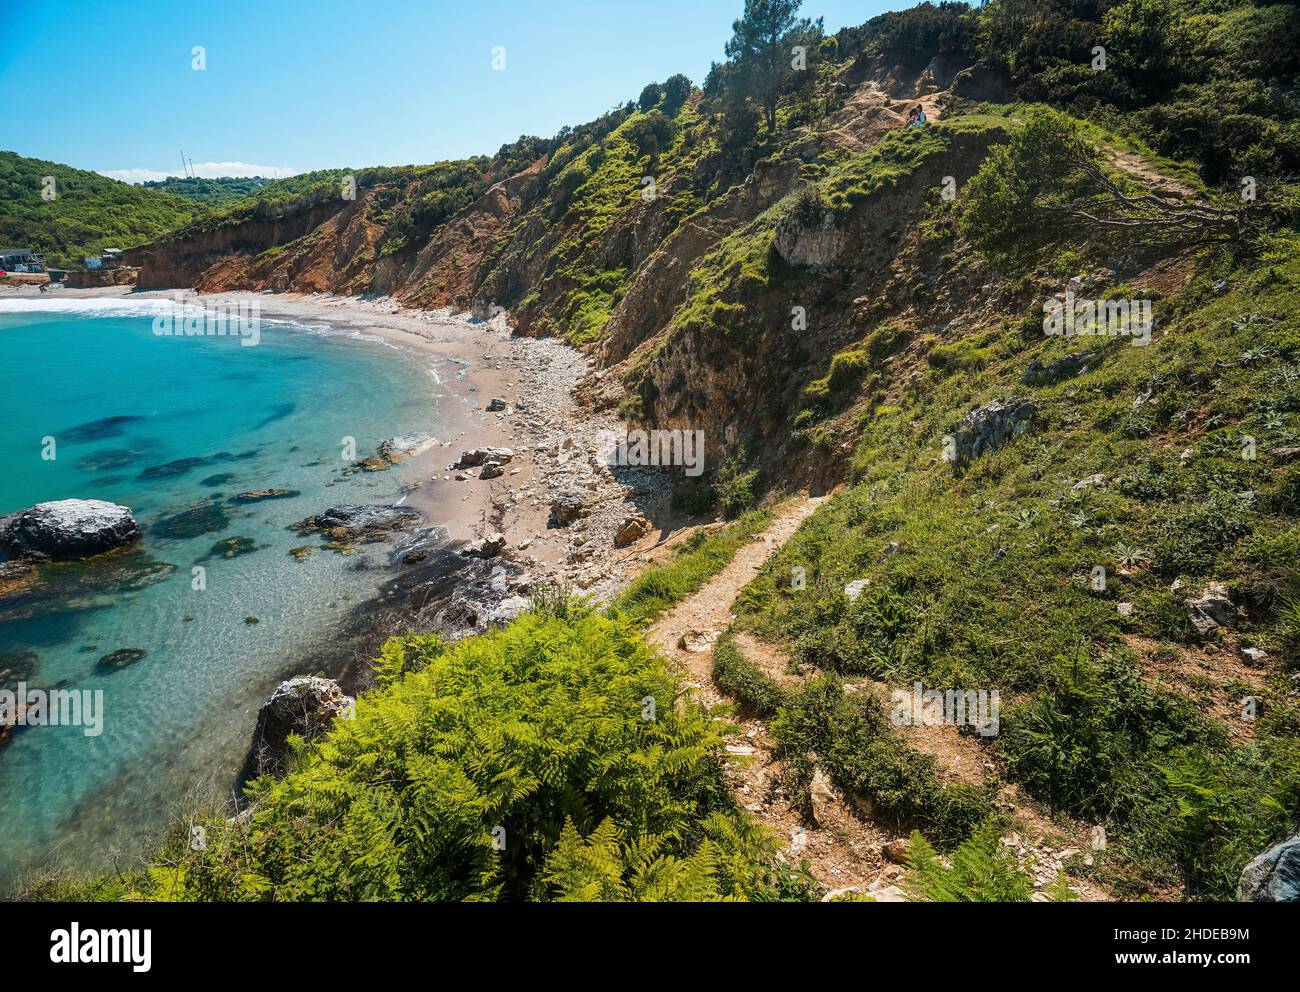 View of Kilimli Beach in Agva. Agva is a populated place and resort destination in the Sile district of Istanbul Province, Turkey. Stock Photo